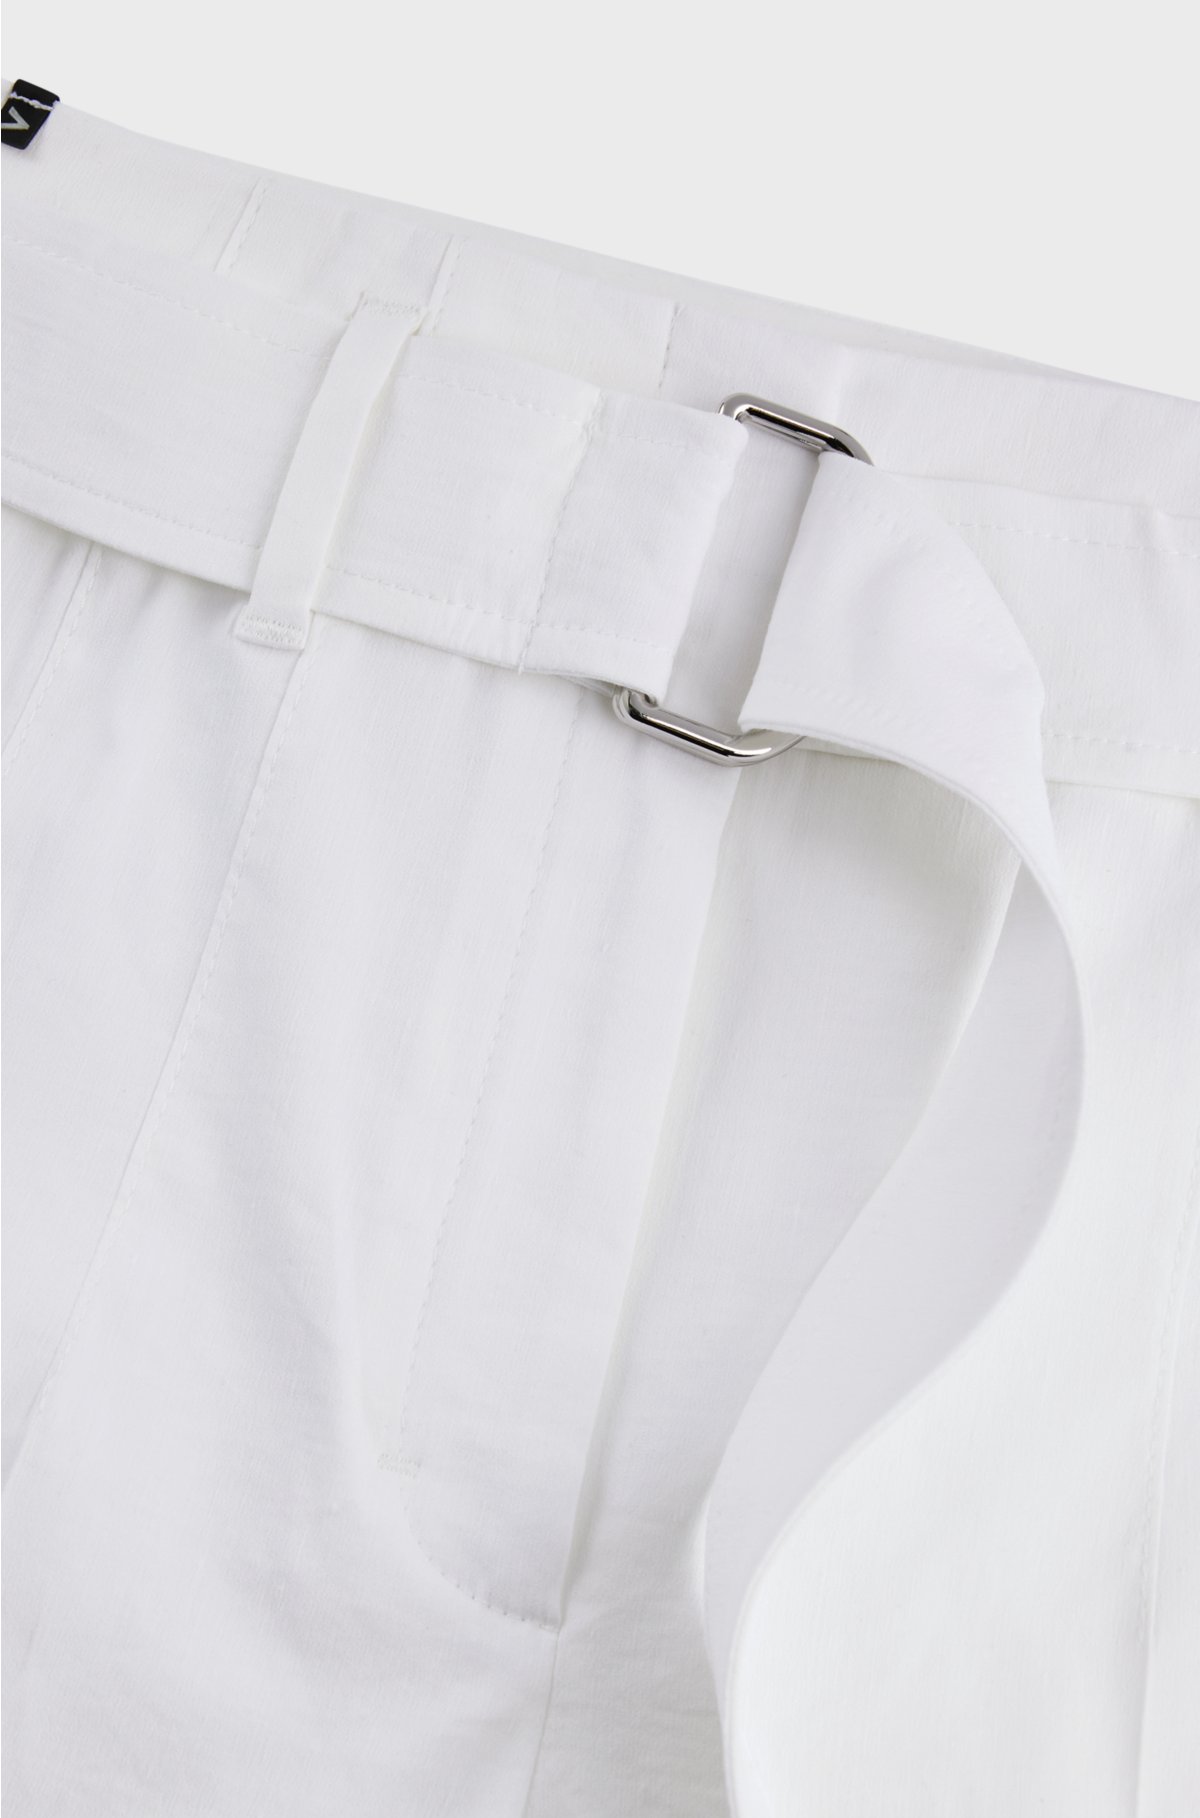 Relaxed-fit trousers in a linen blend, White